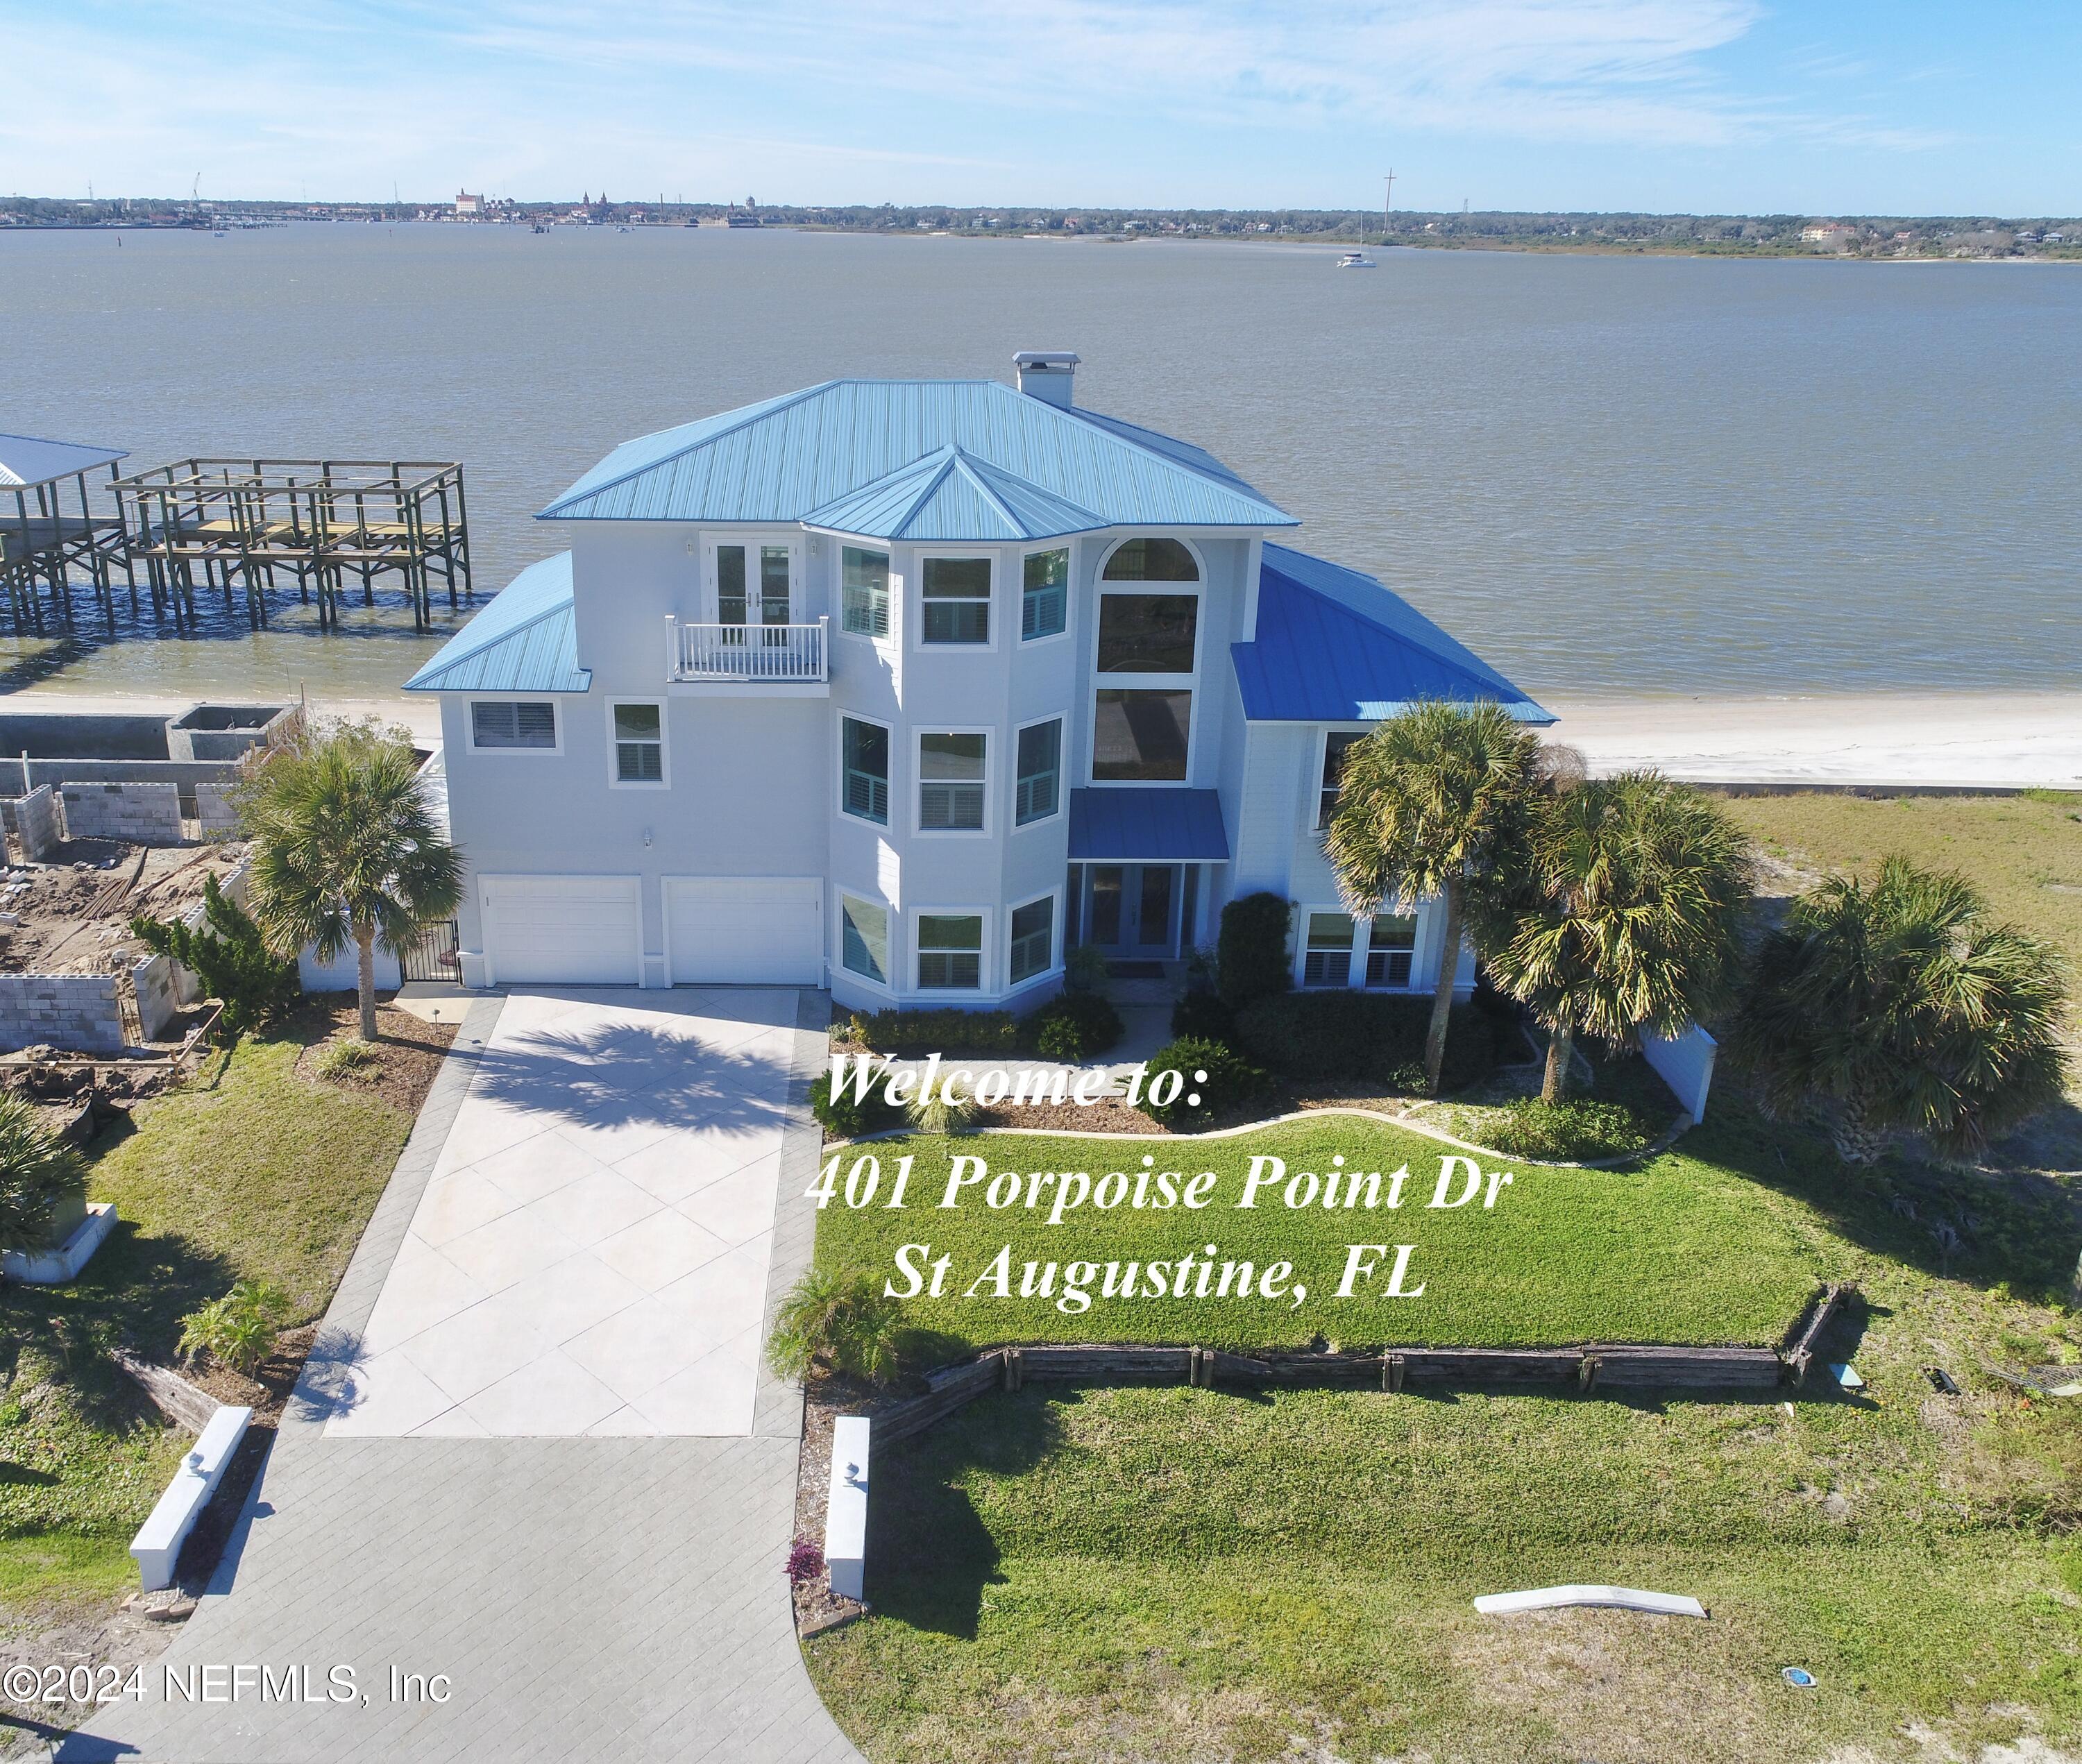 St Augustine, FL home for sale located at 401 Porpoise Point Drive, St Augustine, FL 32084